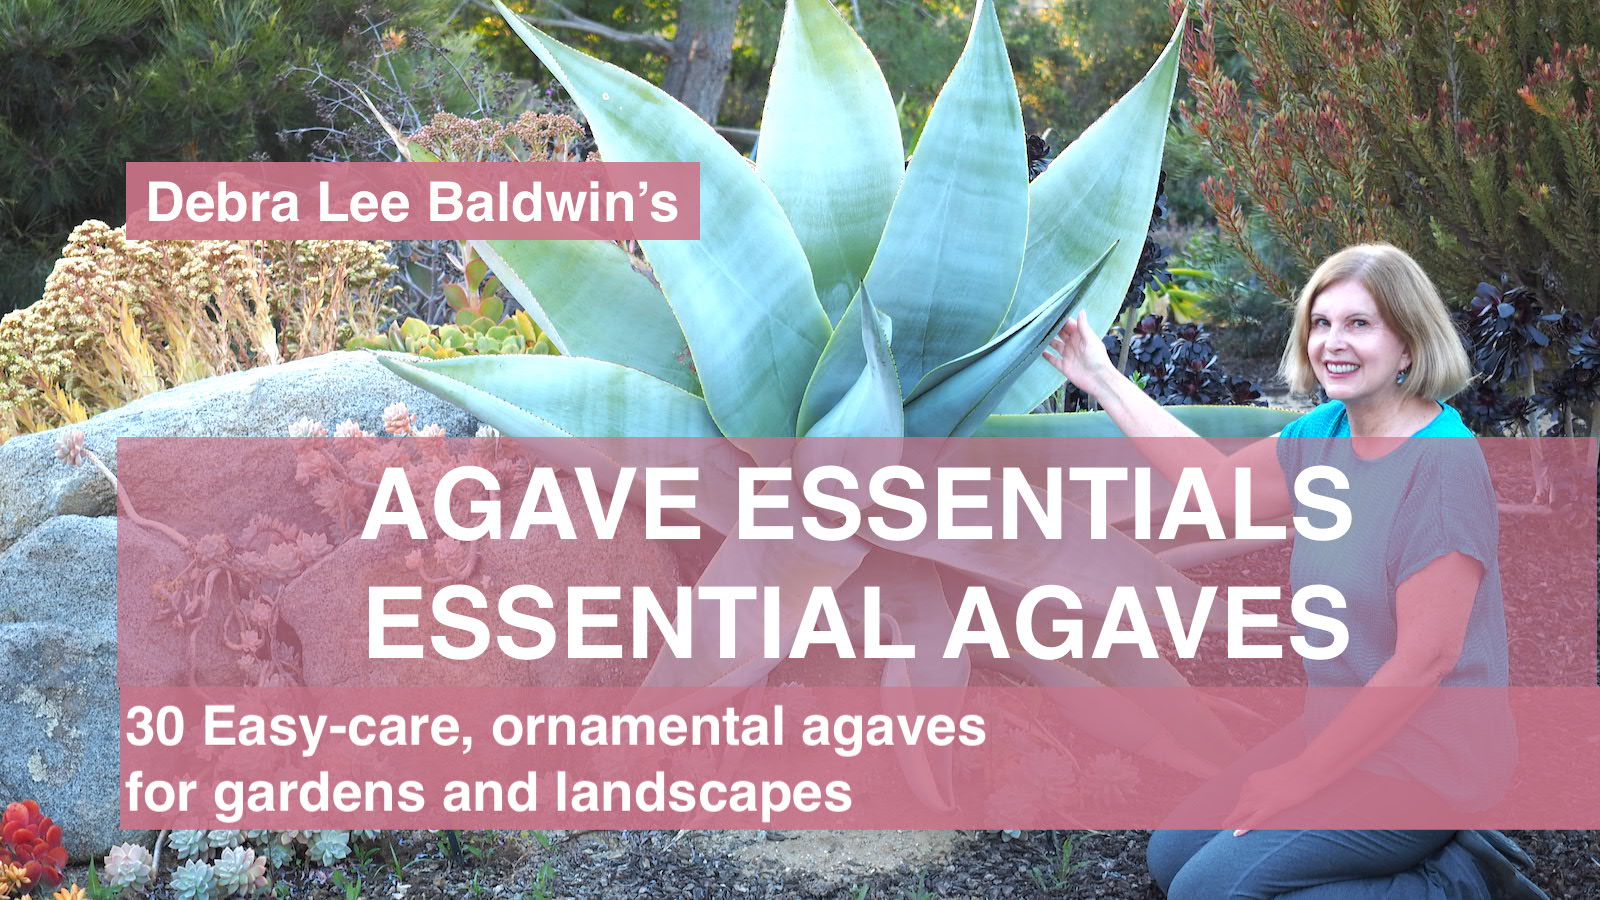 Agave video